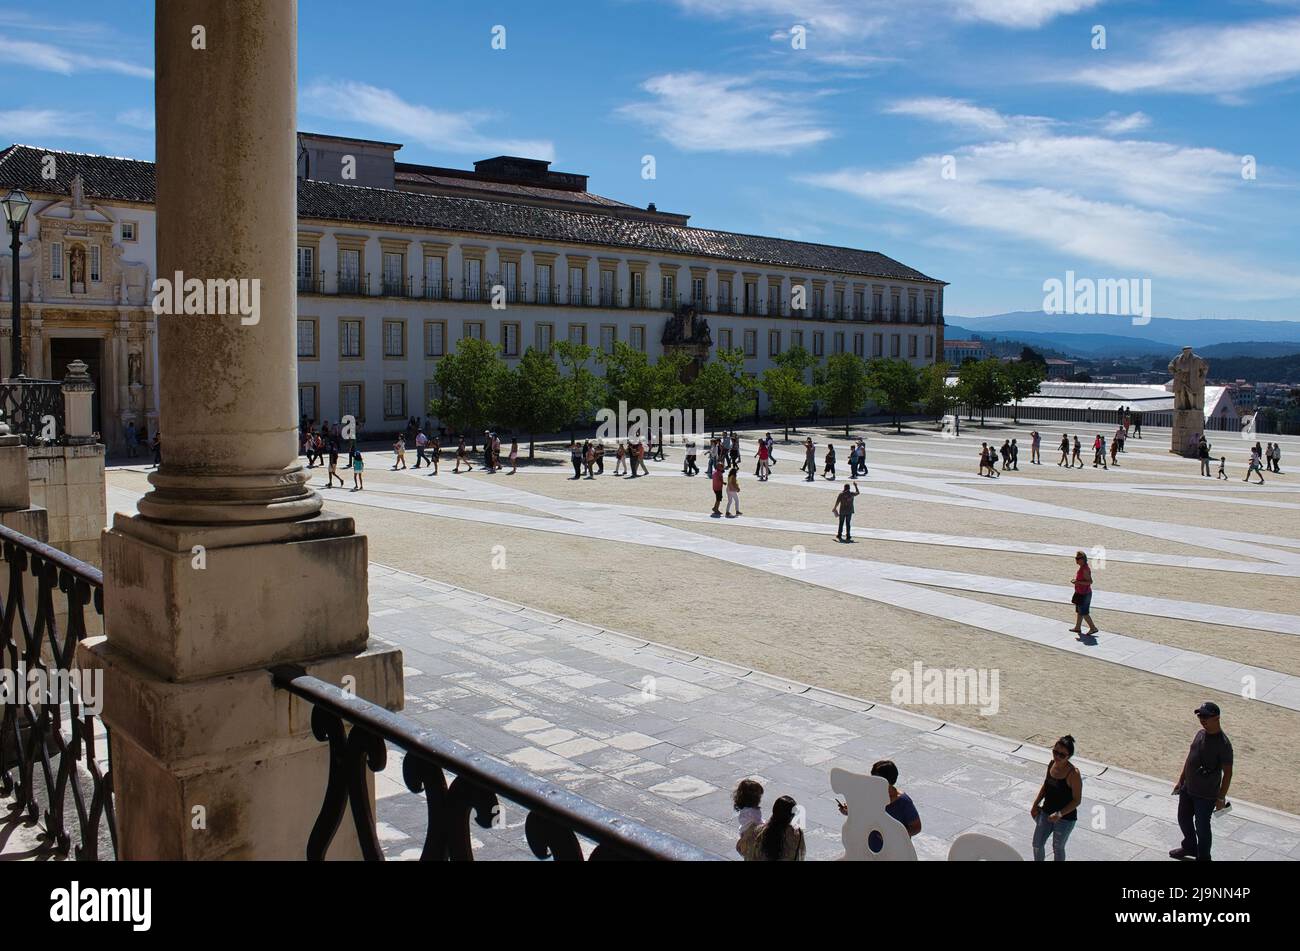 The University of Coimbra (Portugal) one of the oldest and most prestigious universities in Europe is part of the UNESCO heritage. Stock Photo